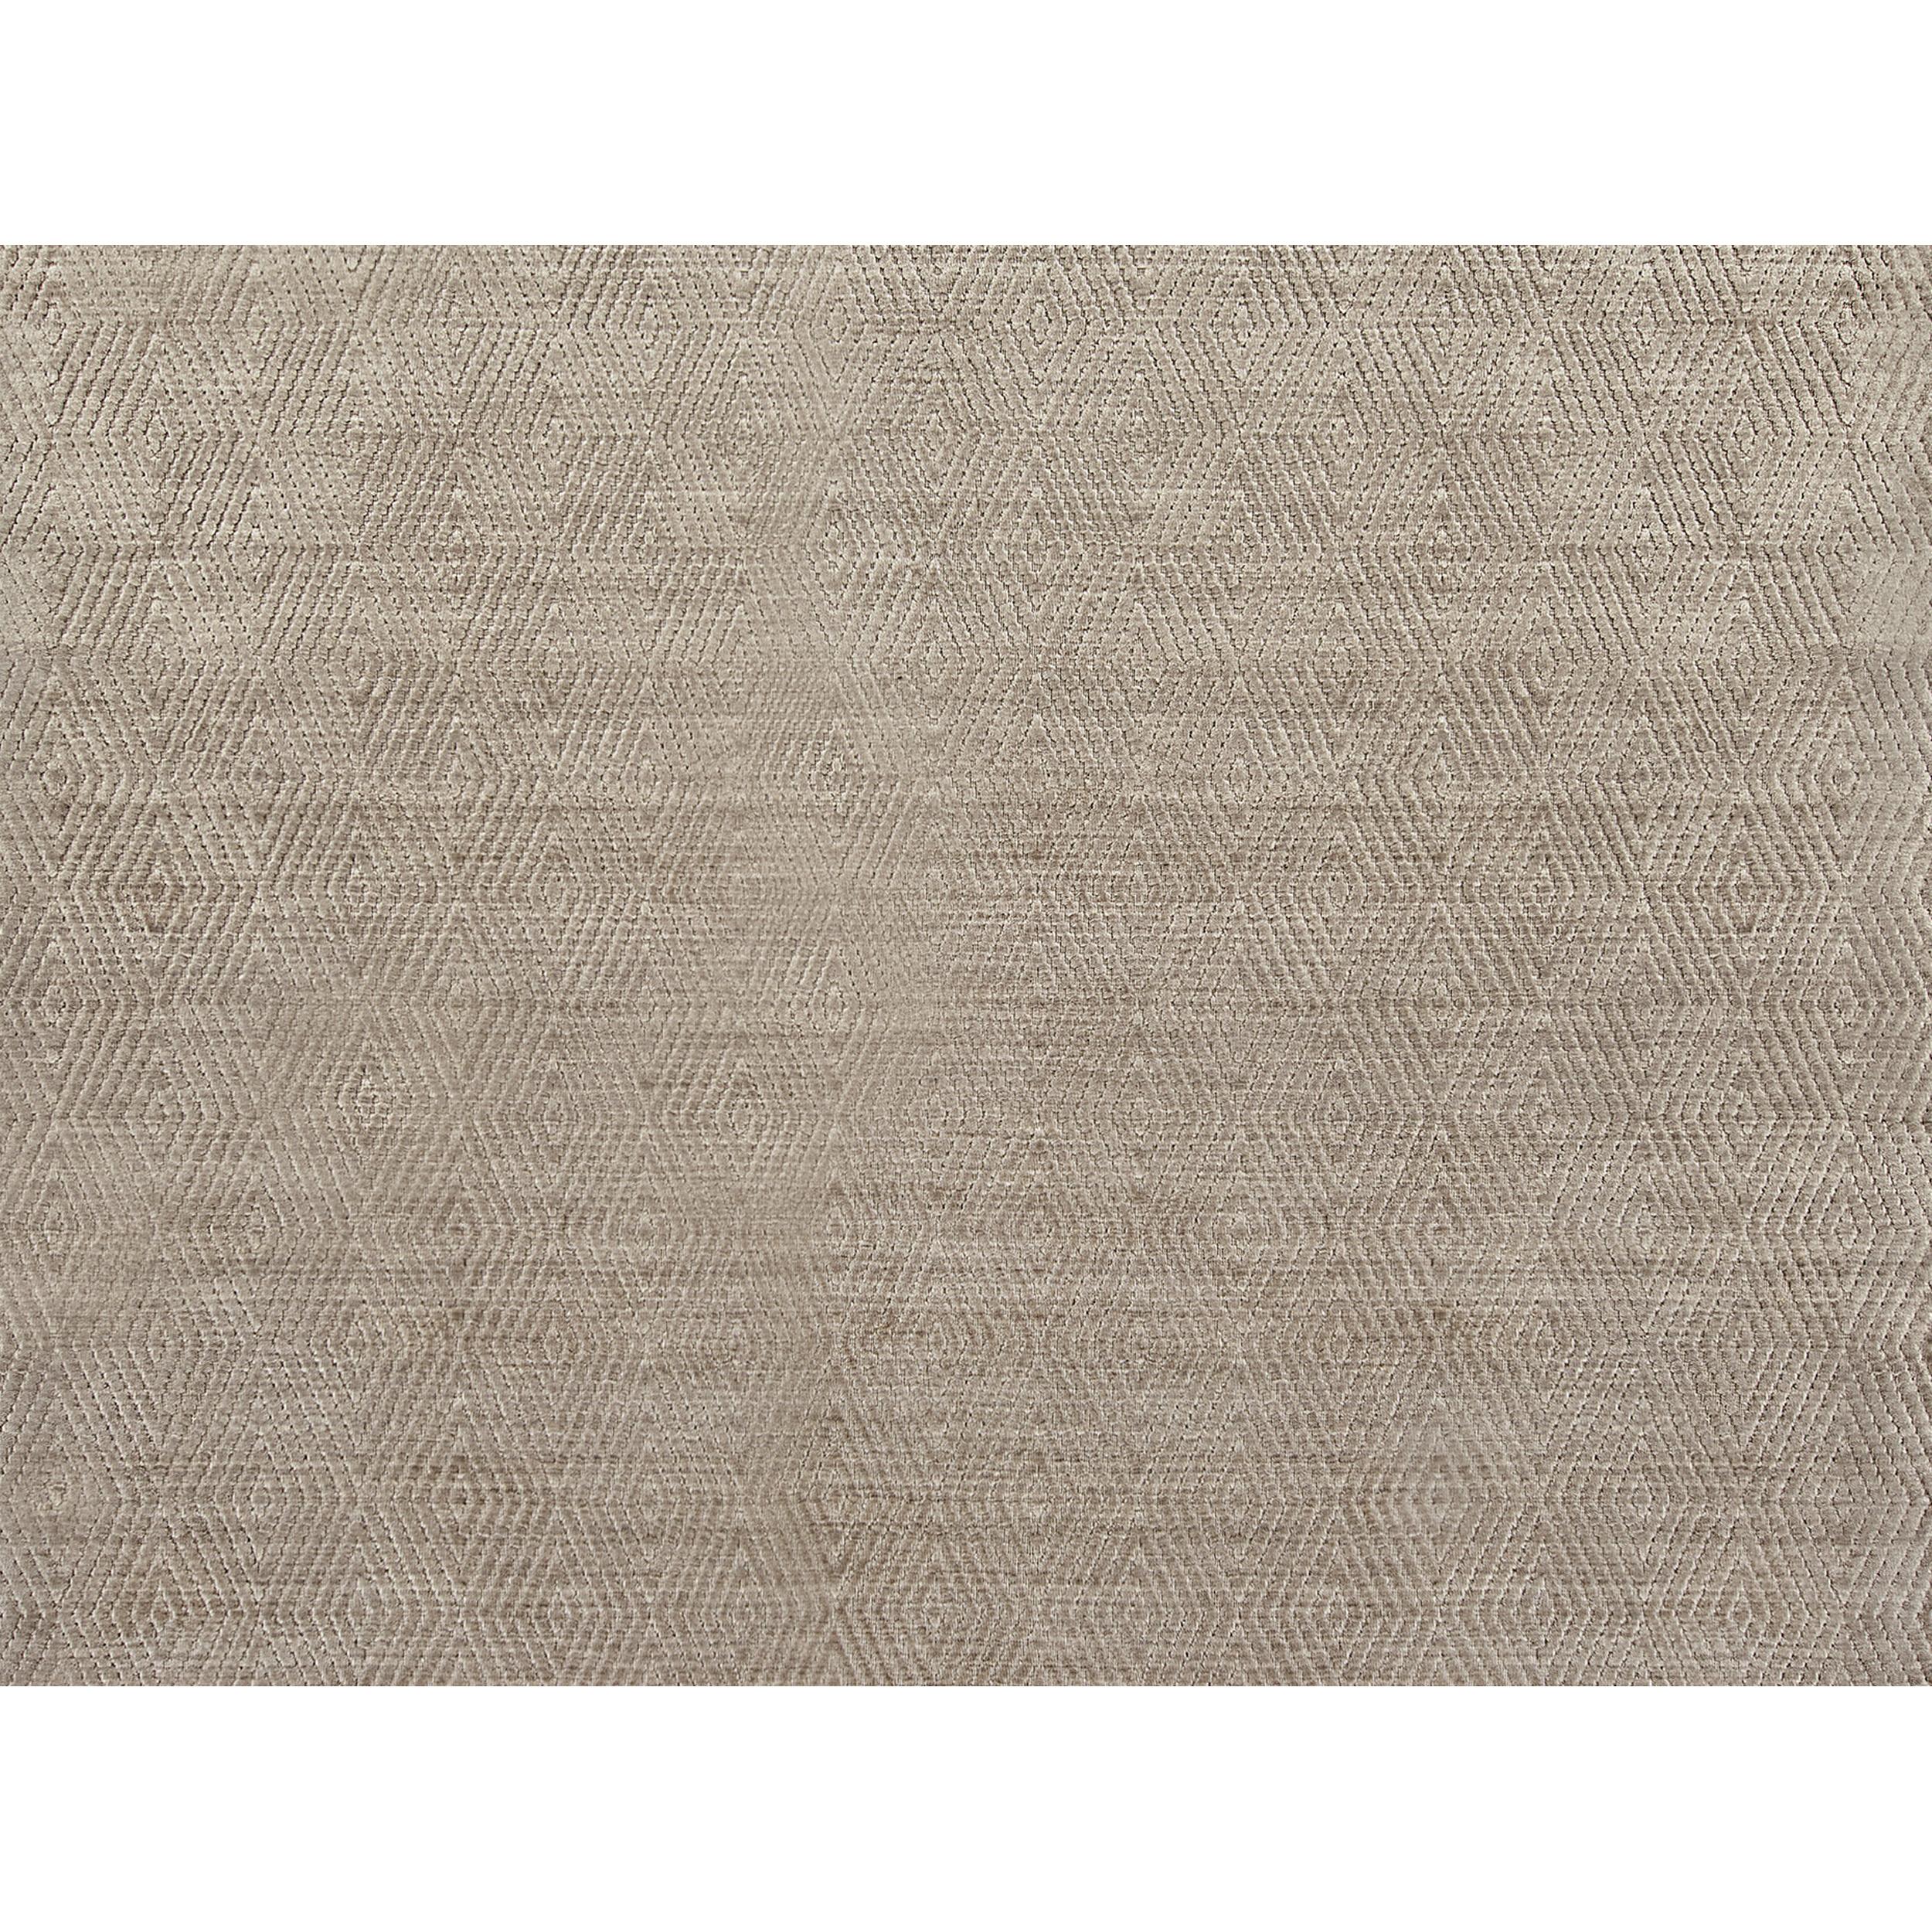 This exquisite modern hand-knotted rug from India offers a delightful sensory experience, captivating both touch and sight with its luscious hand-loomed designs. The use of lustrous viscose creates a surface that is not only incredibly soft to the